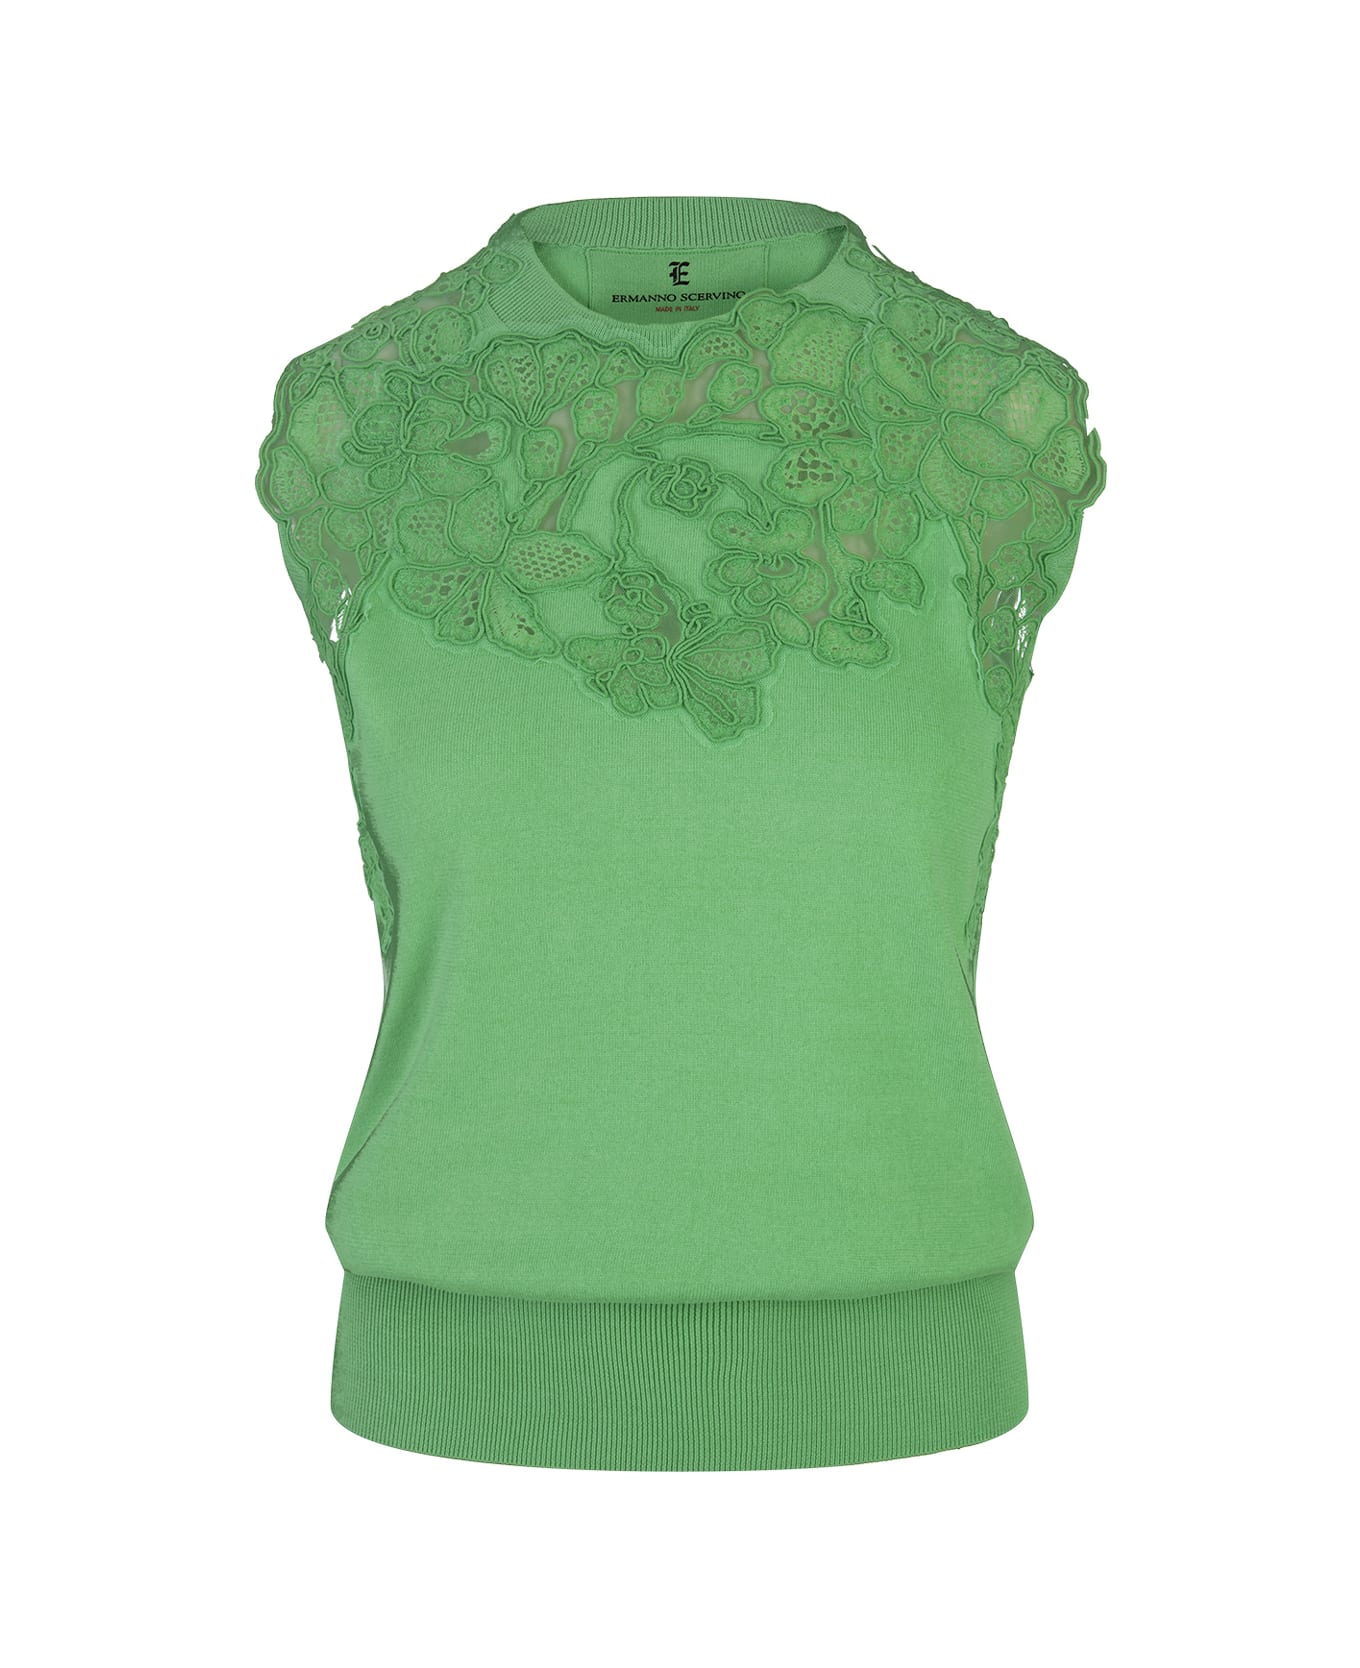 Ermanno Scervino Green Knitted Sleeveless Top With Lace - Green トップス